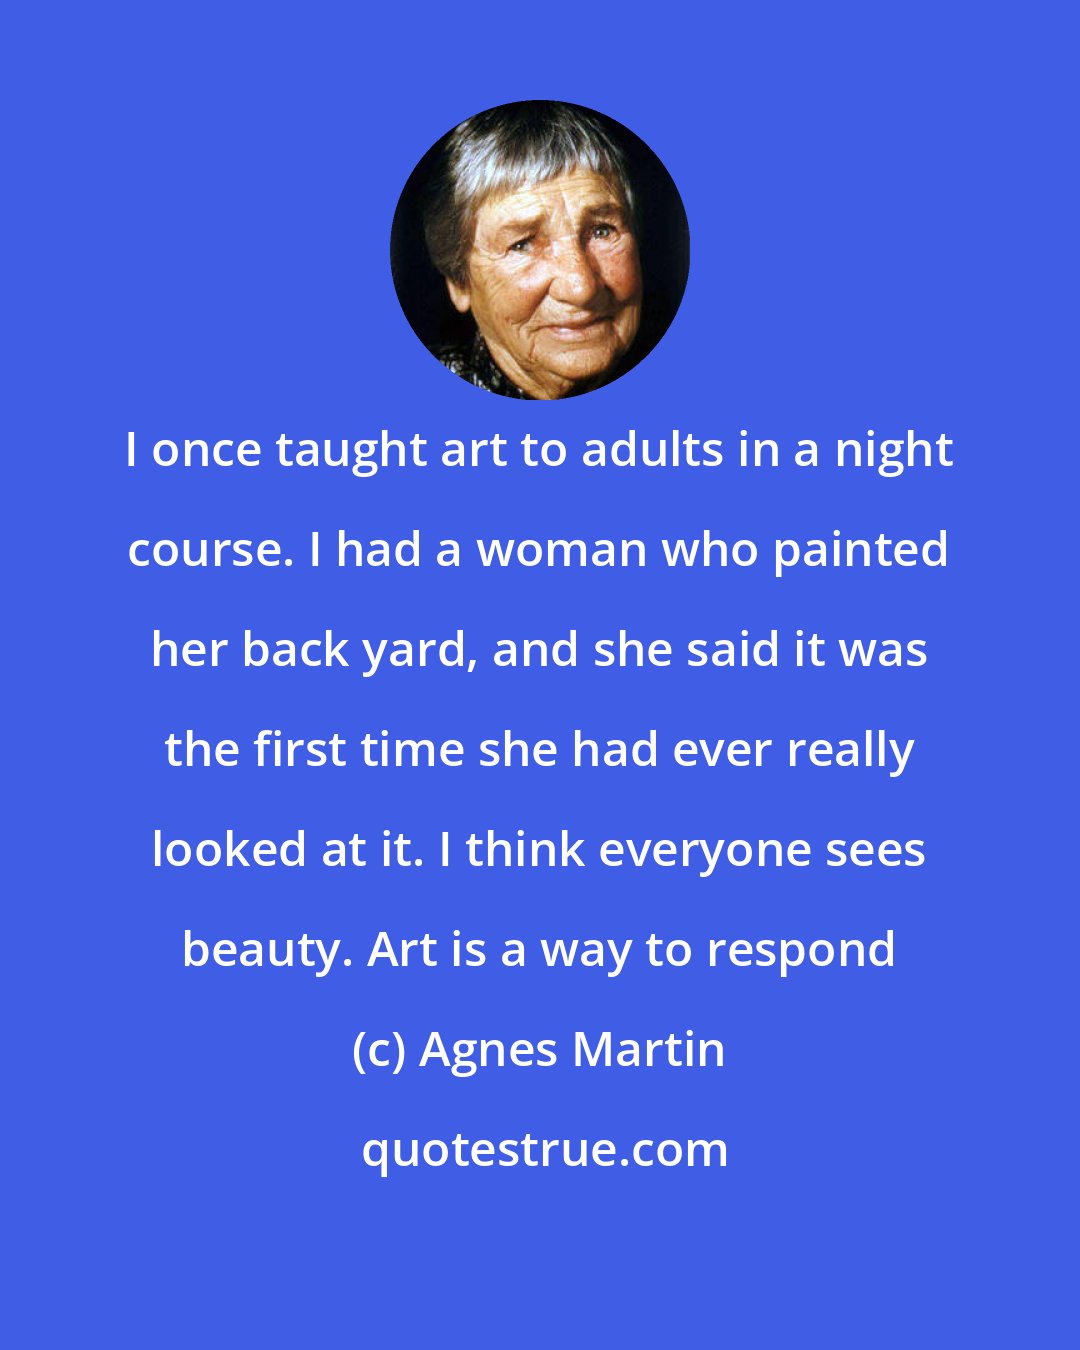 Agnes Martin: I once taught art to adults in a night course. I had a woman who painted her back yard, and she said it was the first time she had ever really looked at it. I think everyone sees beauty. Art is a way to respond